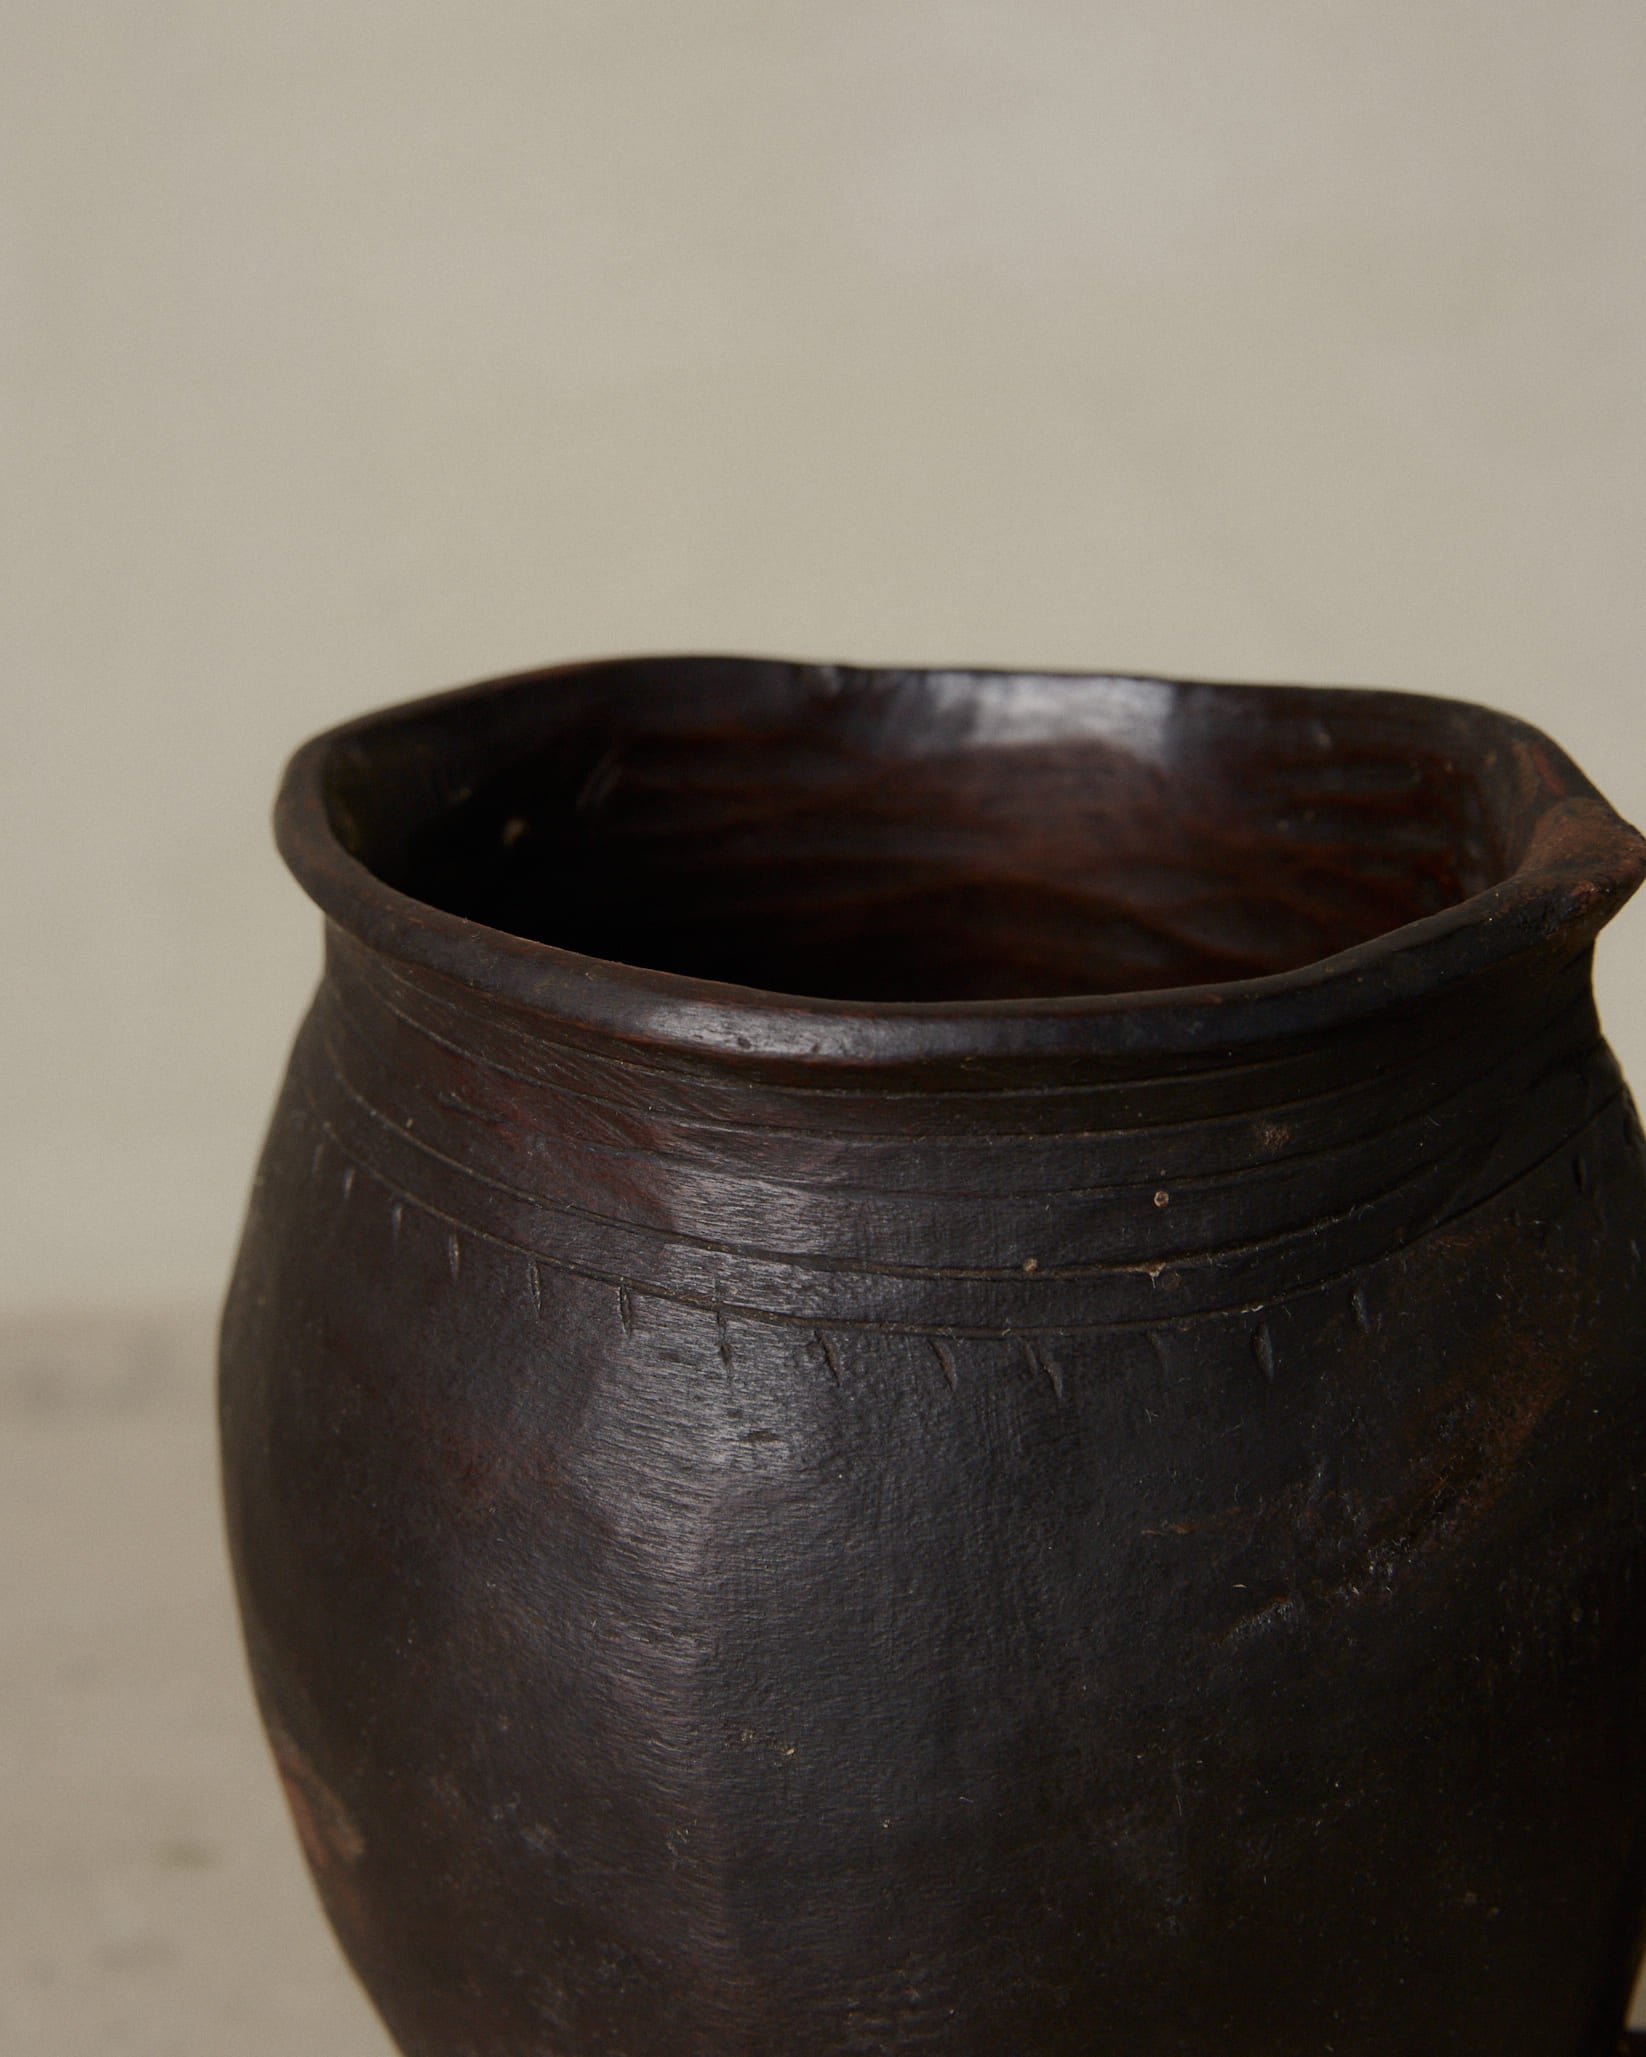 Anton Pitcher. Rare vintage find. Small, hand carved milk pitcher with artful etching details in dark natural wood. 